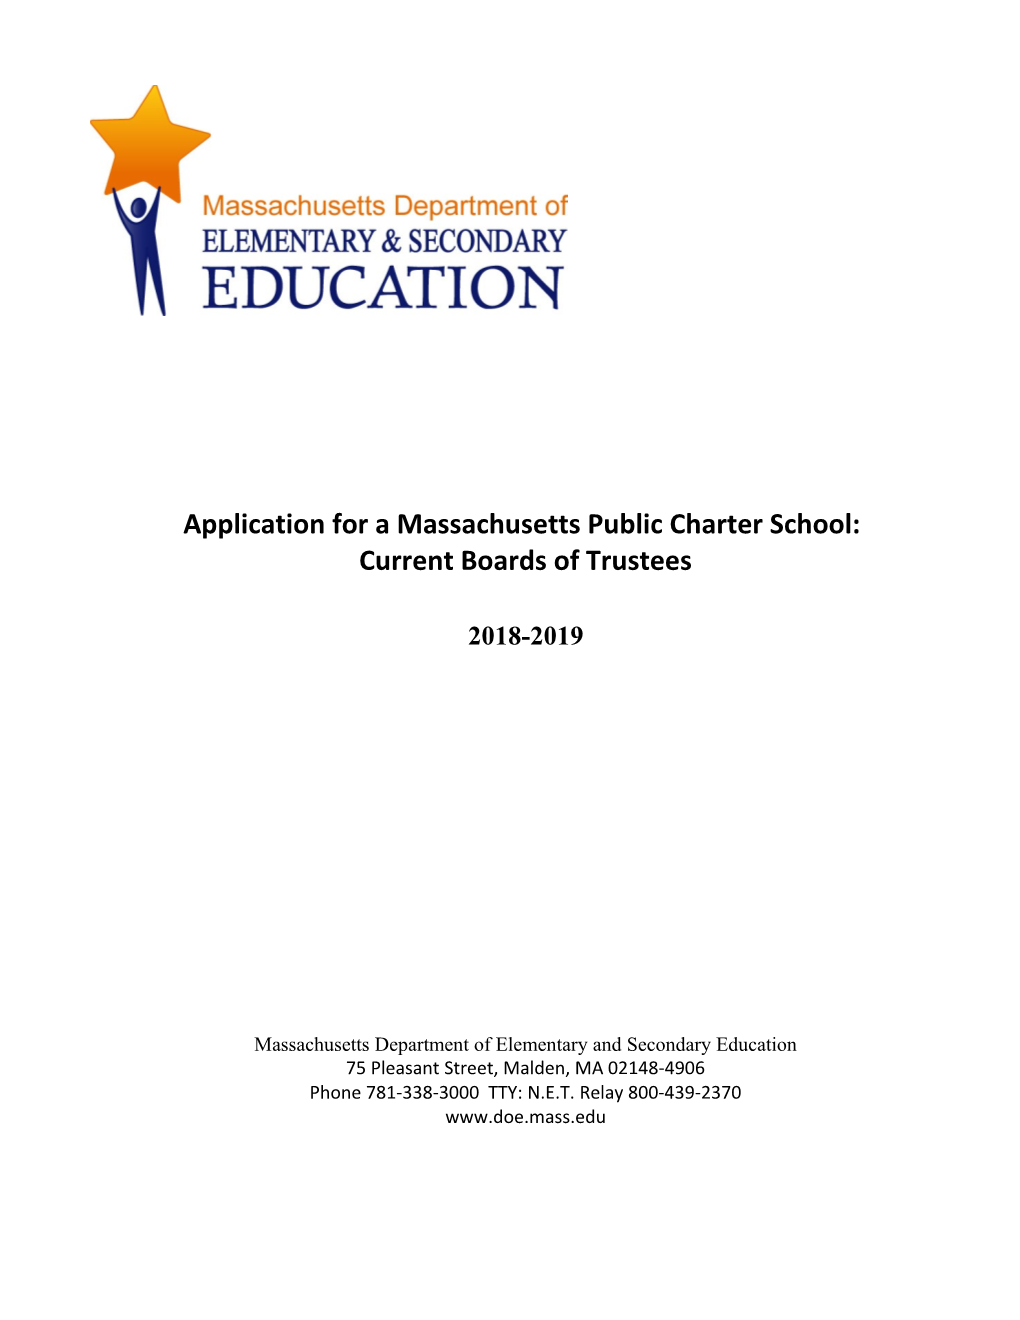 Application for a Massachusetts Public Charter School: Existing Boards